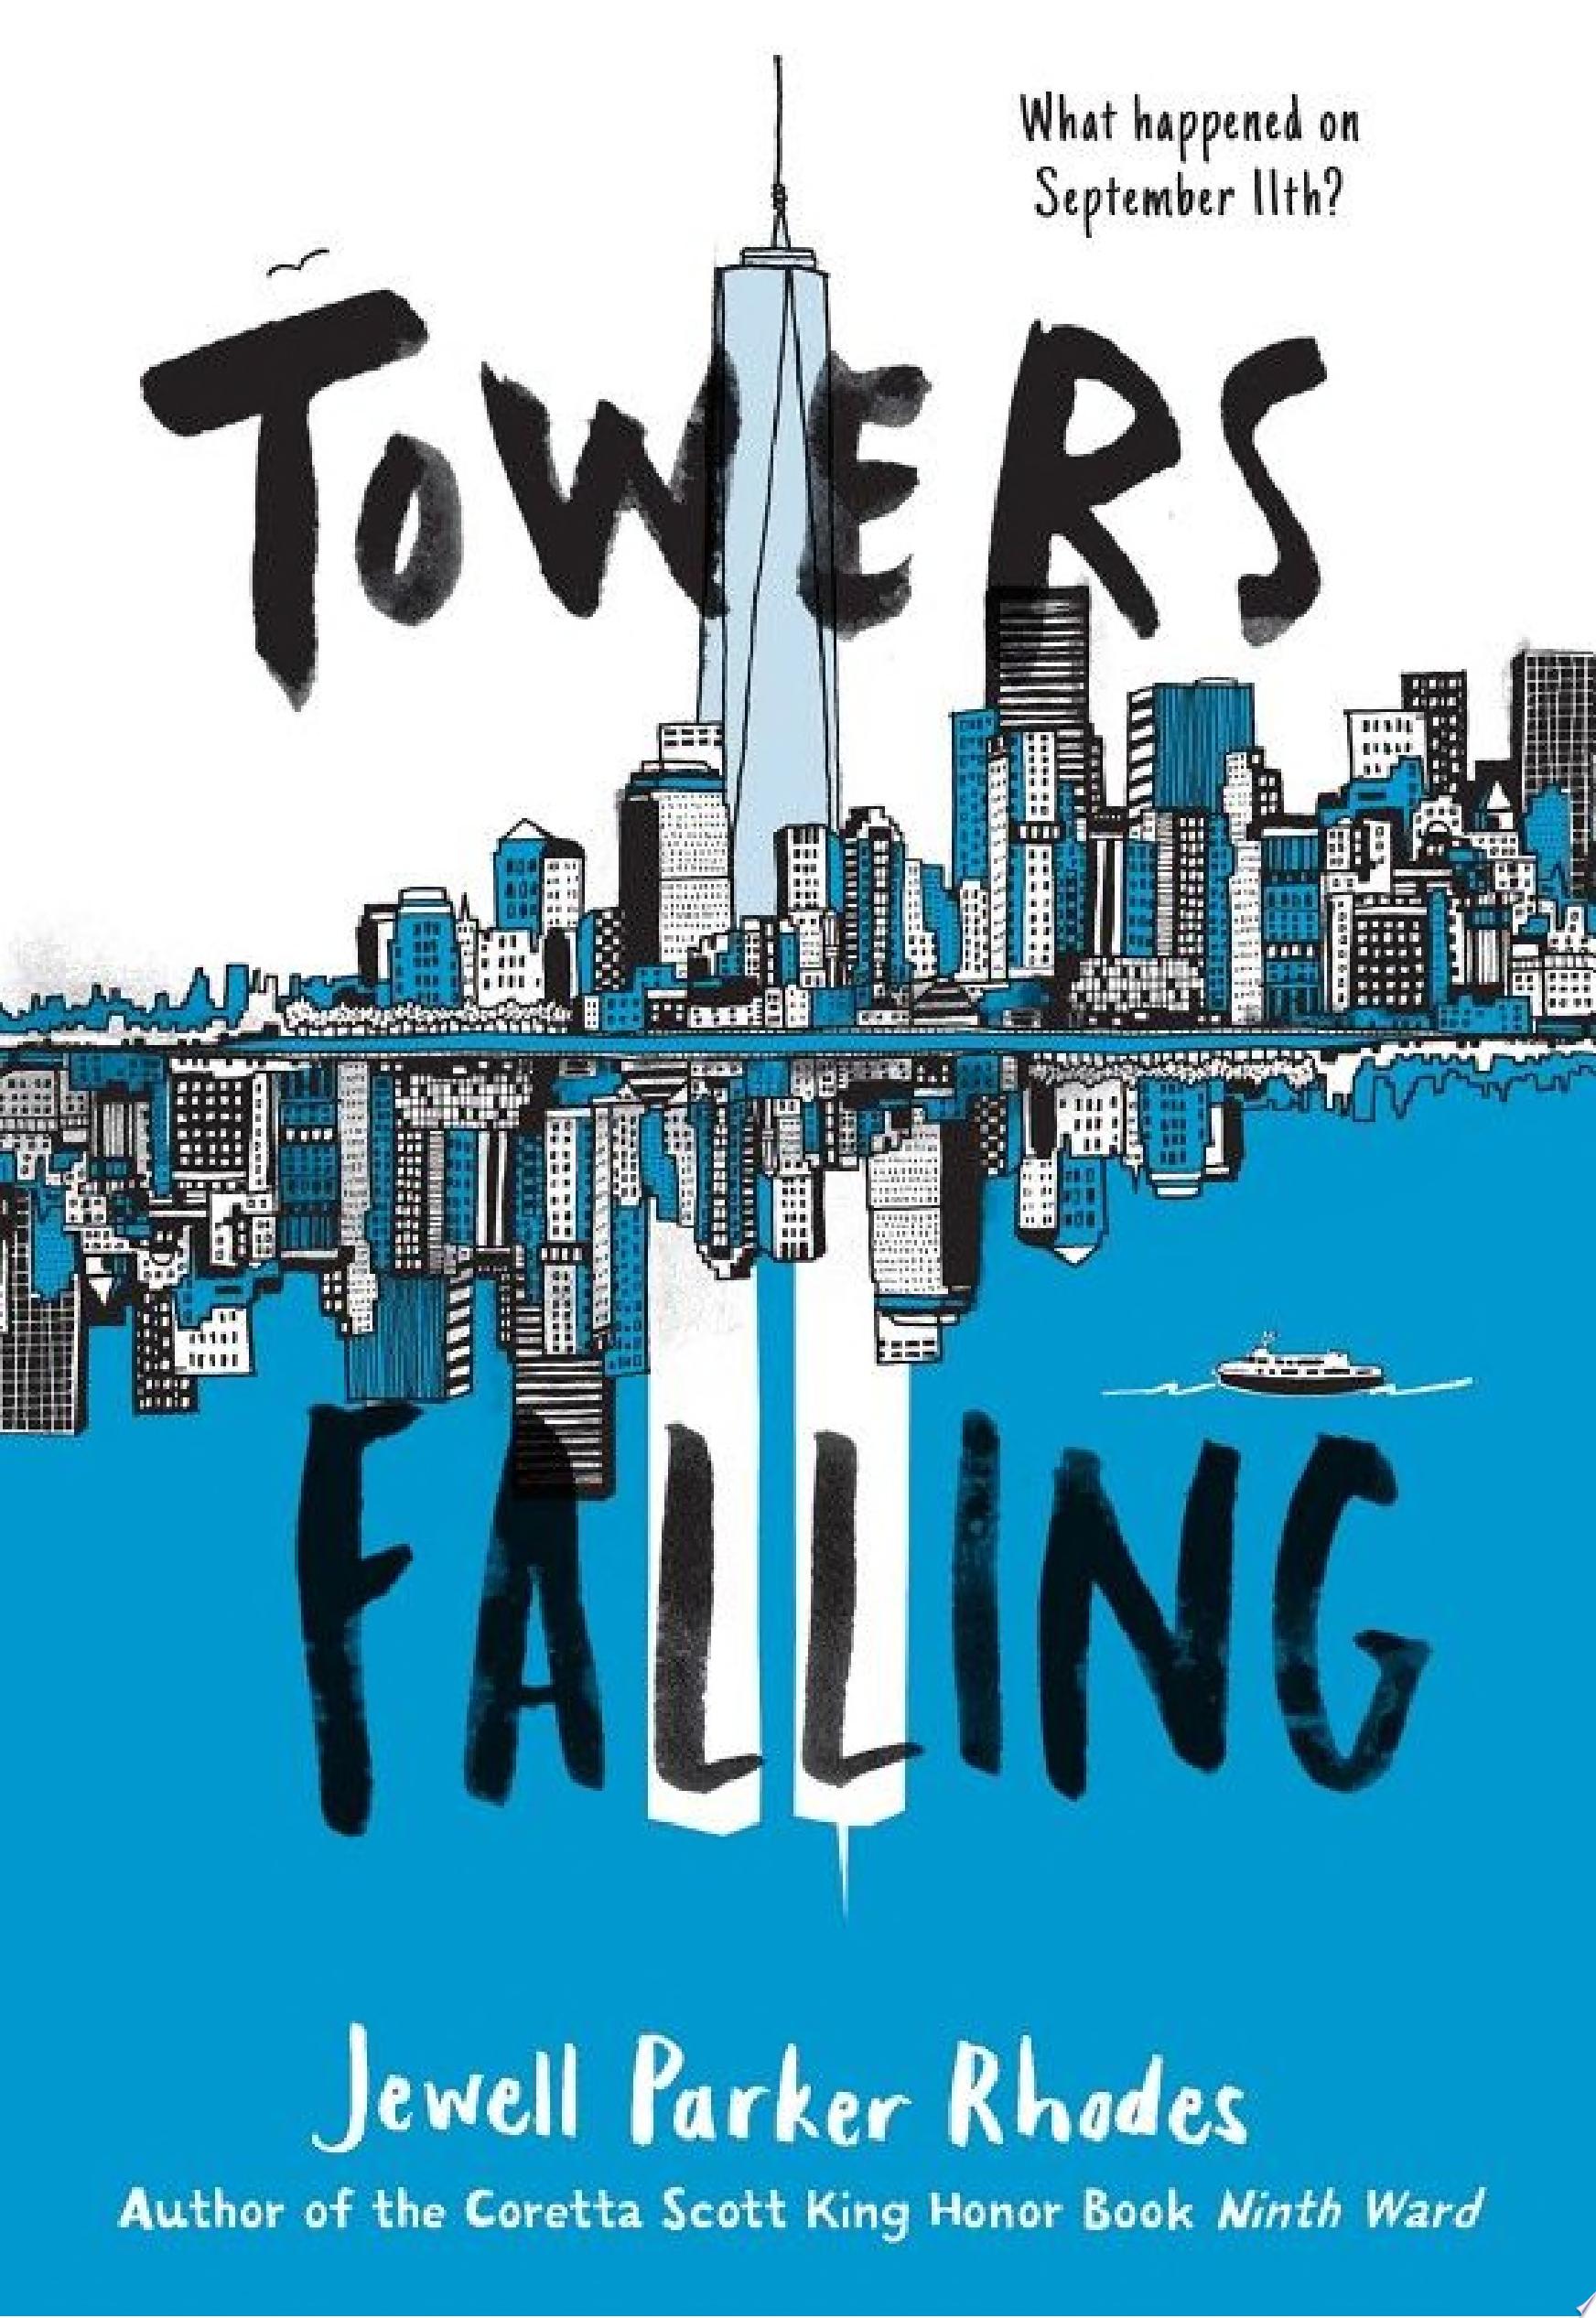 Image for "Towers Falling"